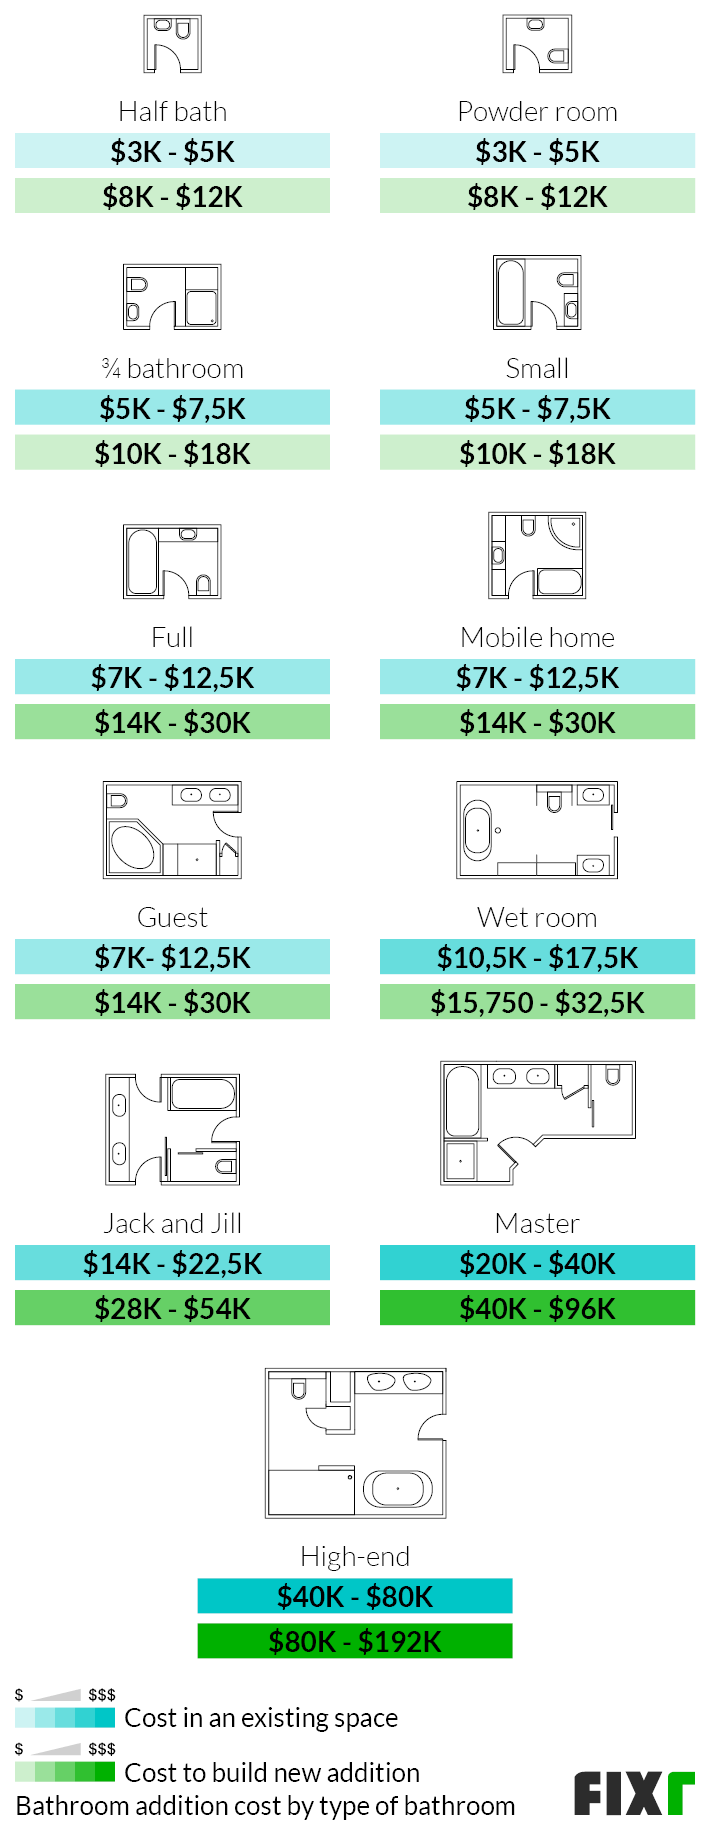 Bathroom Addition Cost, How Much Does A Bathroom Cost To Build